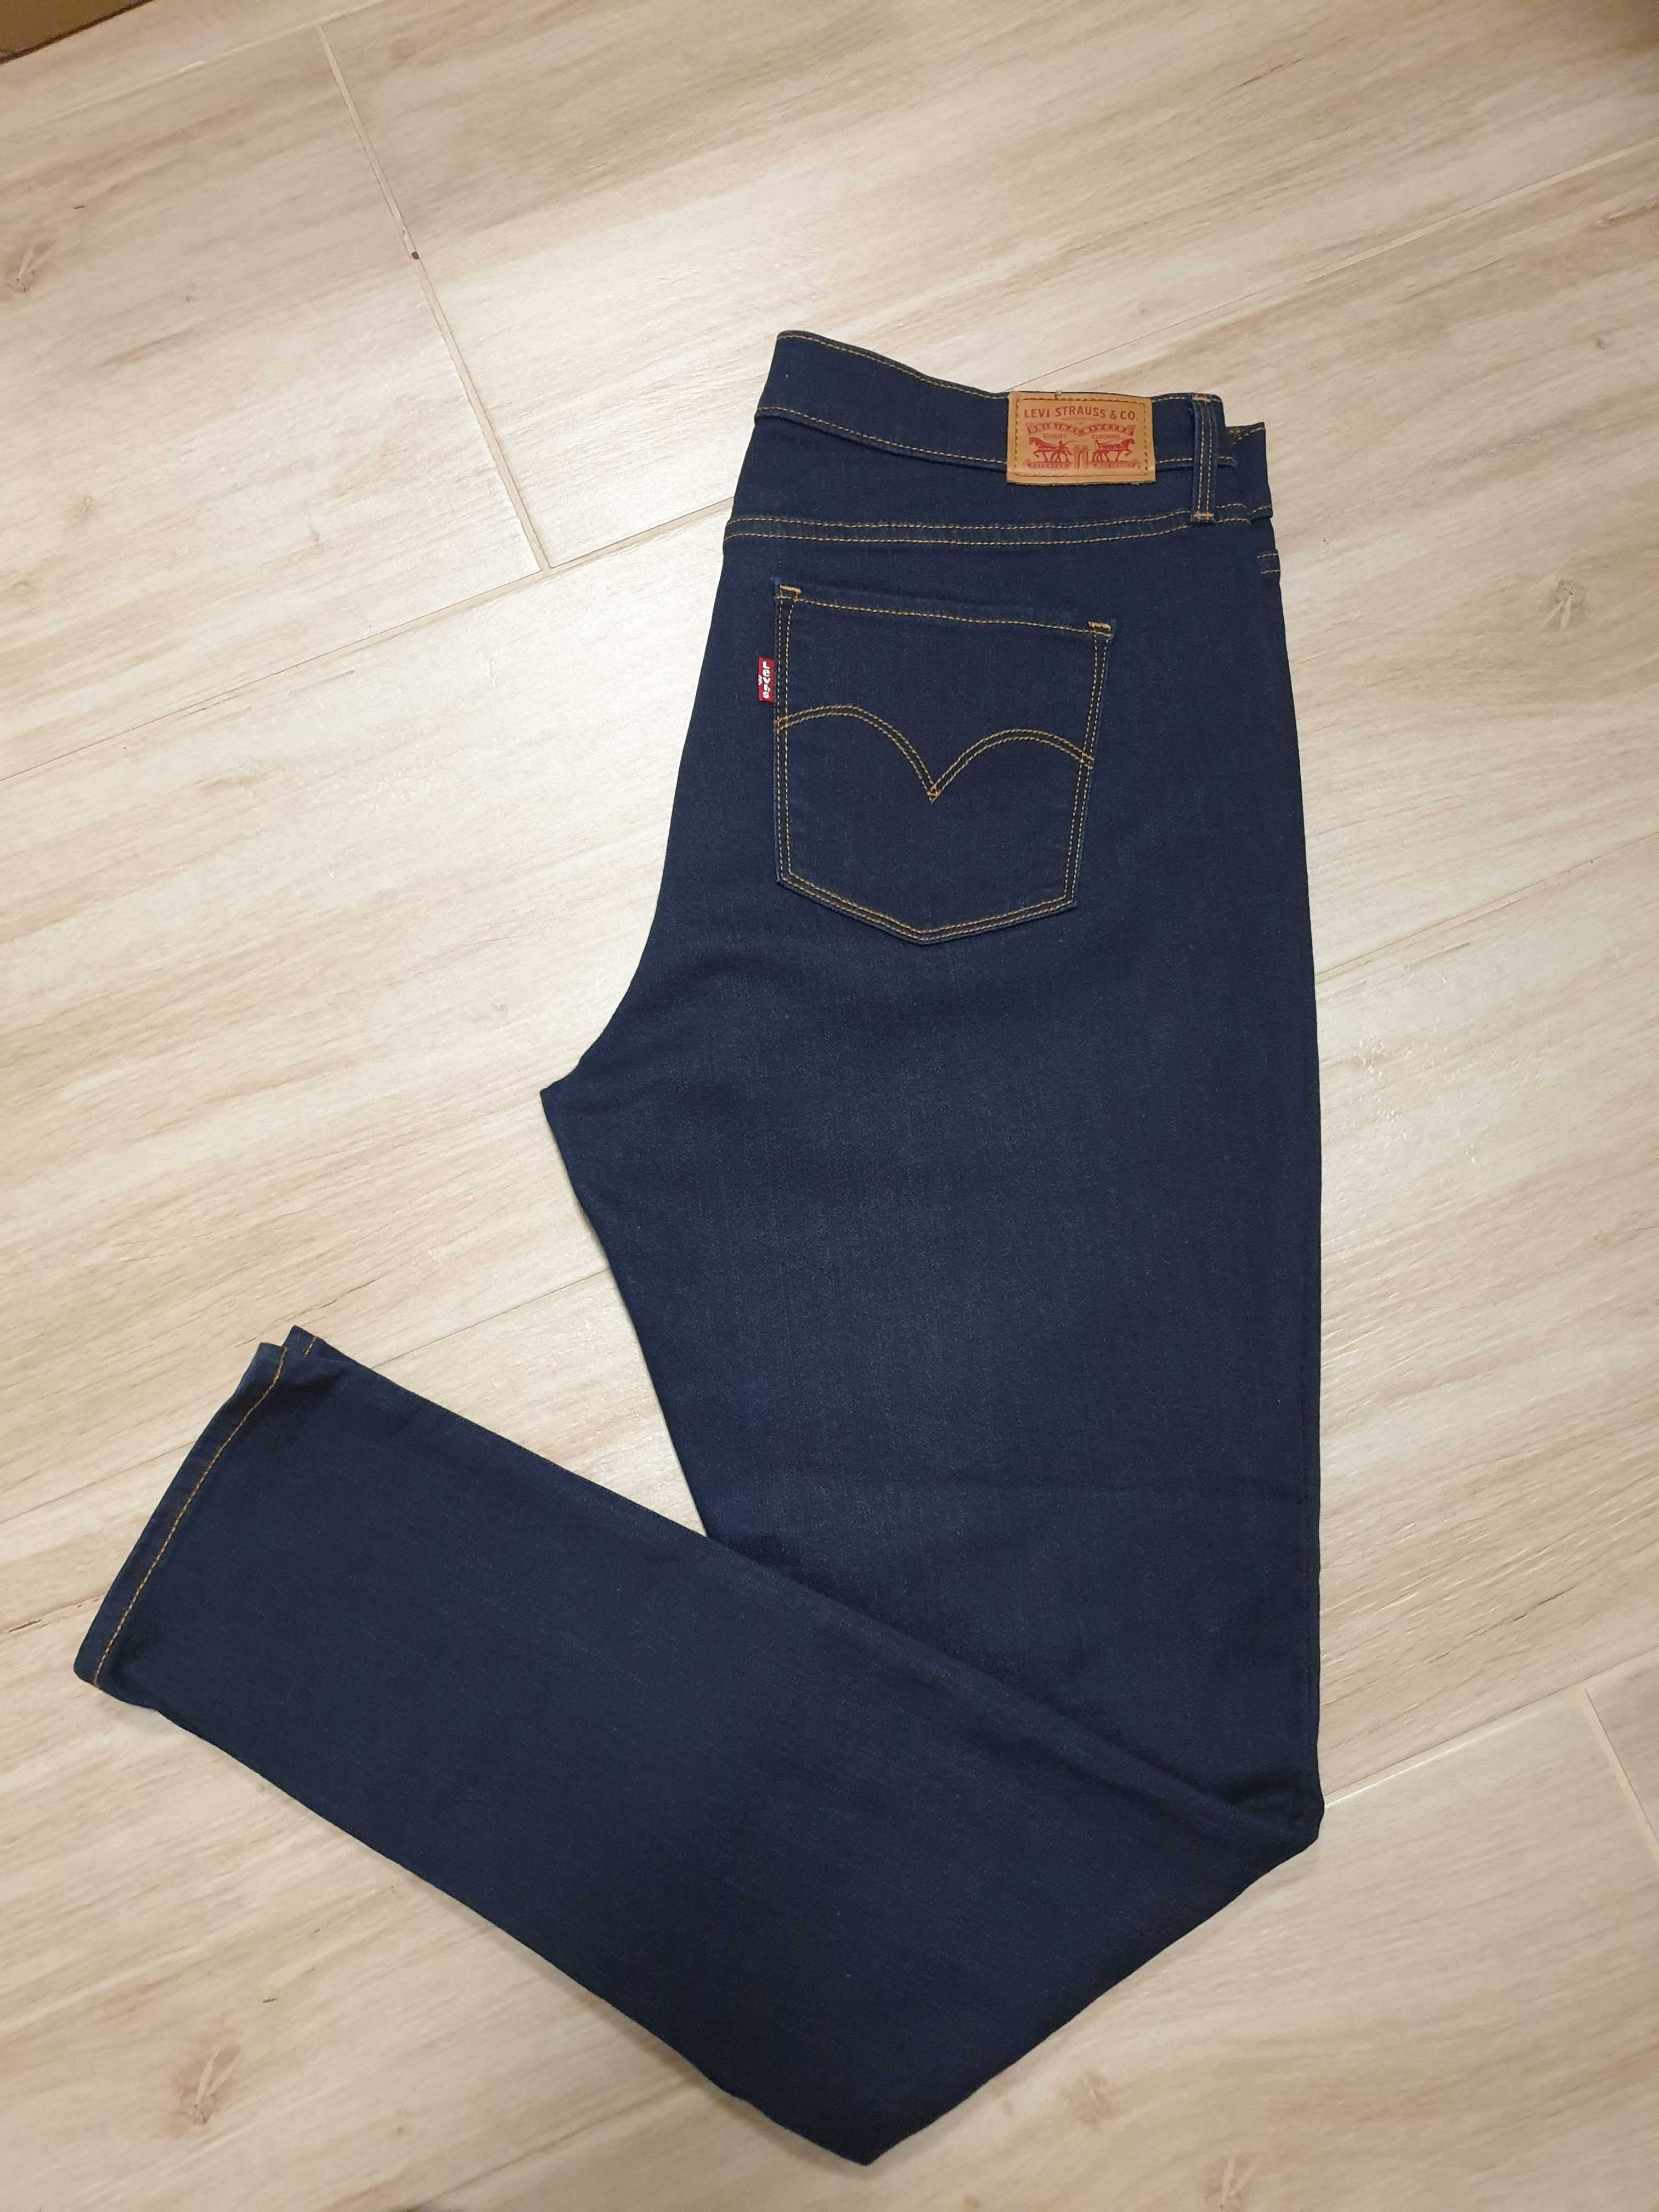 Levis 311 shaping skinny